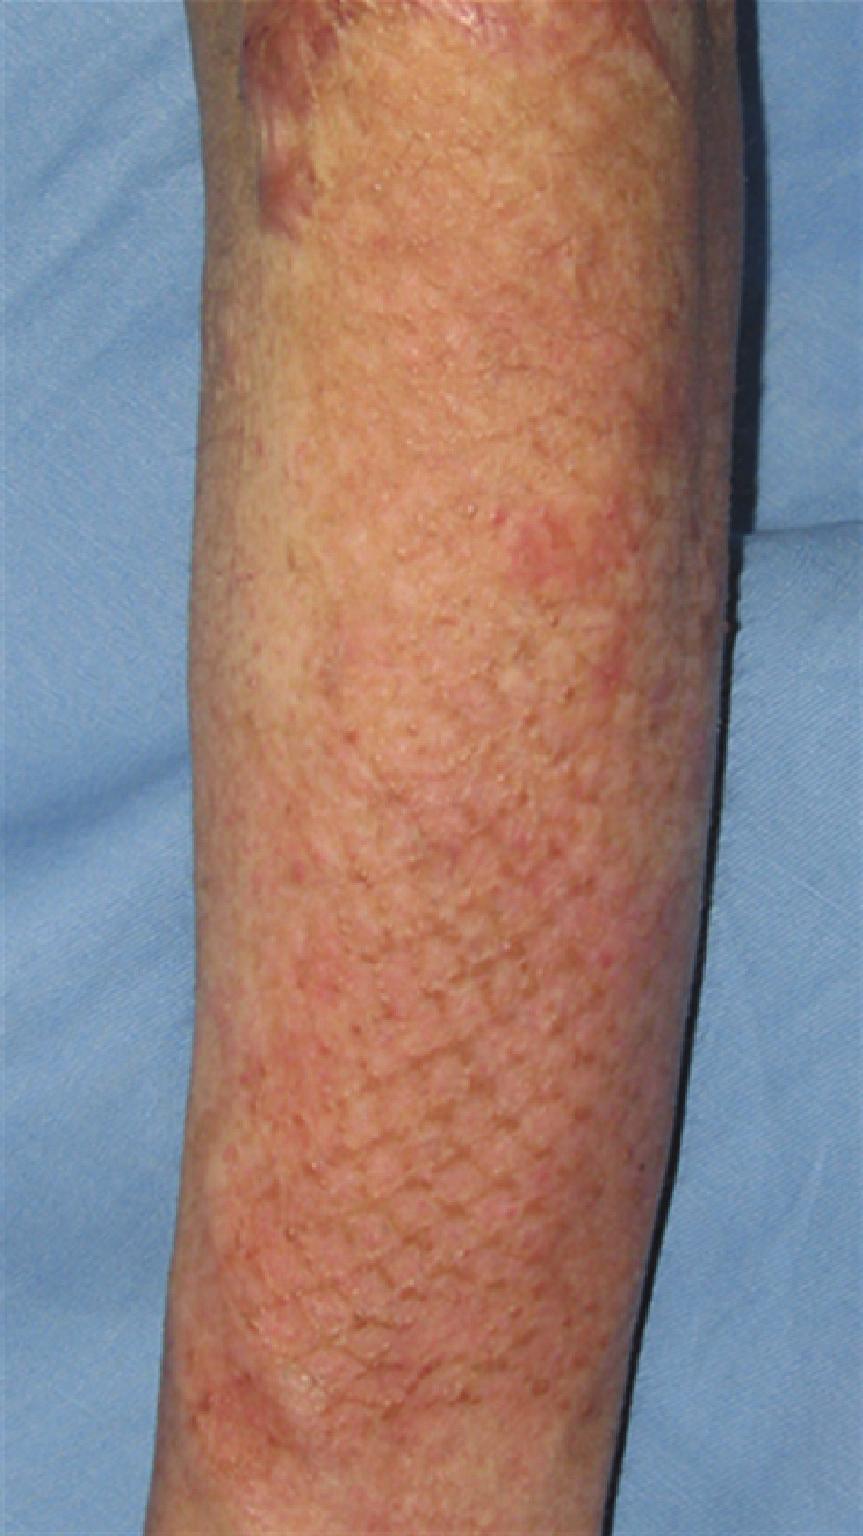 Figure : Fifty three-year-old male, mesh skin grafted scars on left forearm (deep flame burn caused by accident, age of scar was 7 months) before and after one treatments.